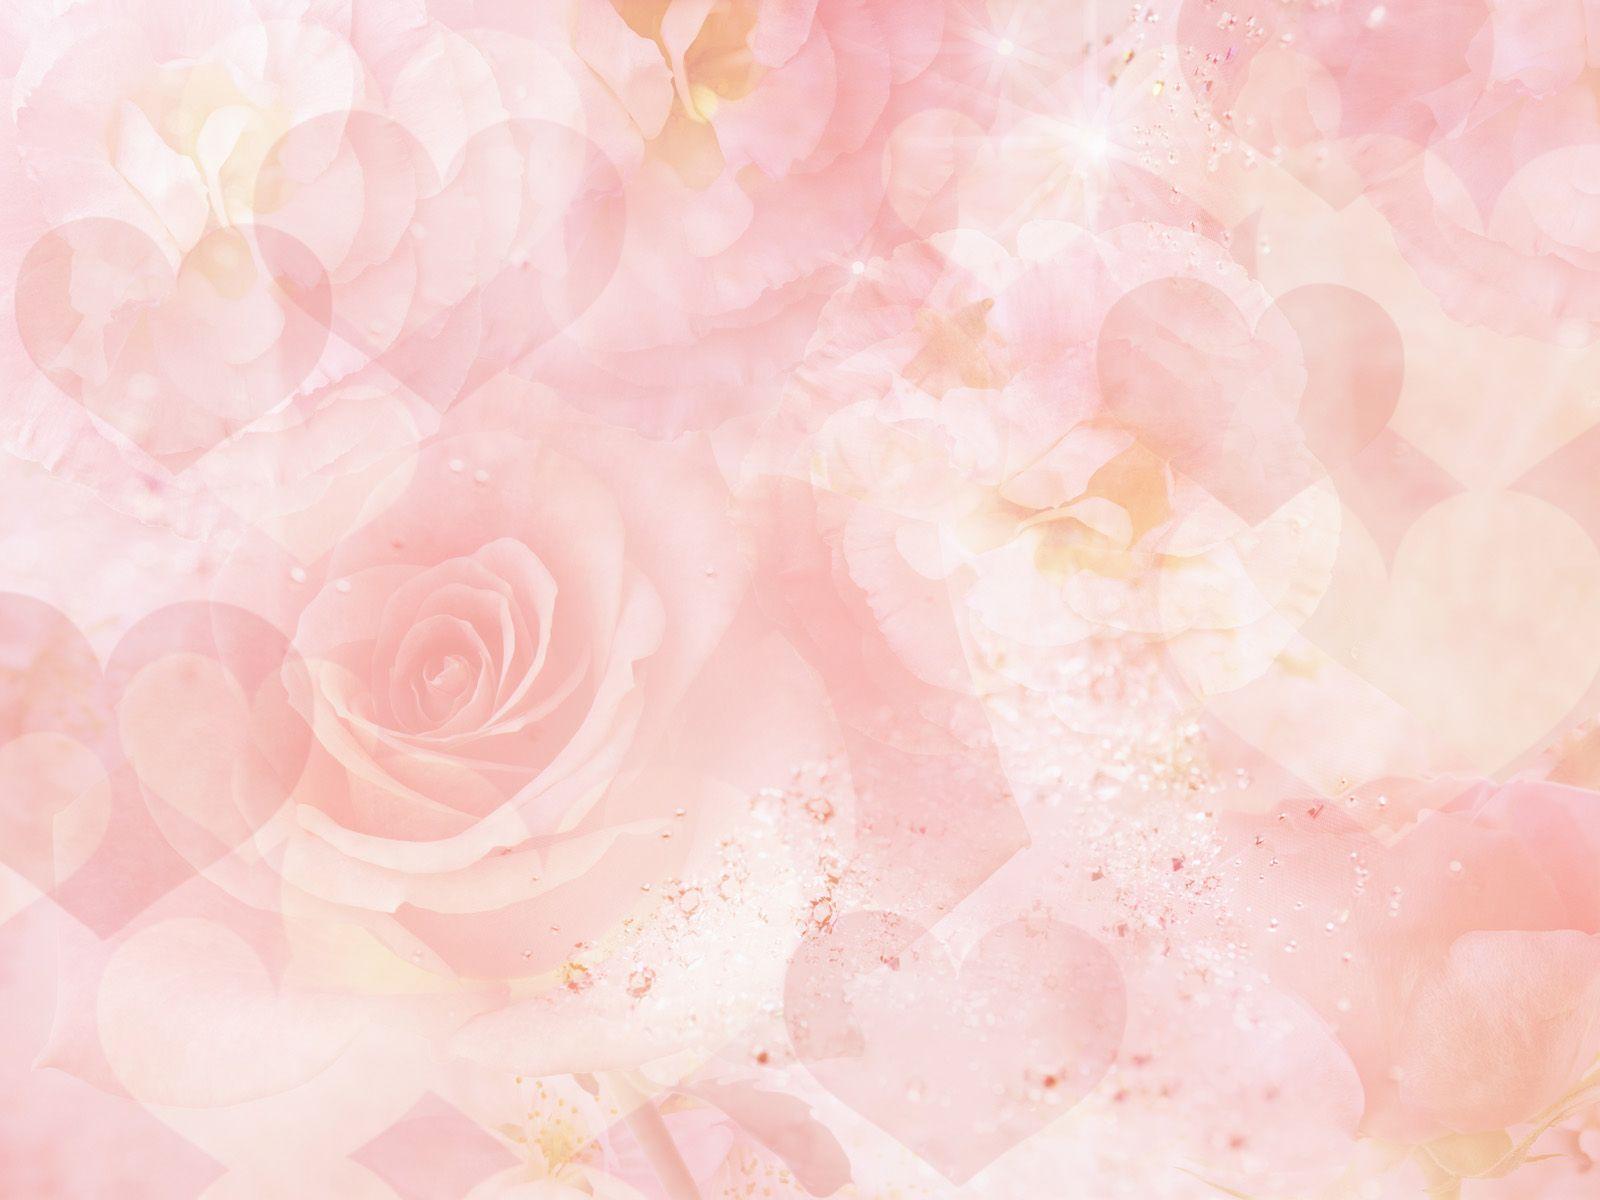 Pink Roses Backgrounds - Wallpaper Cave